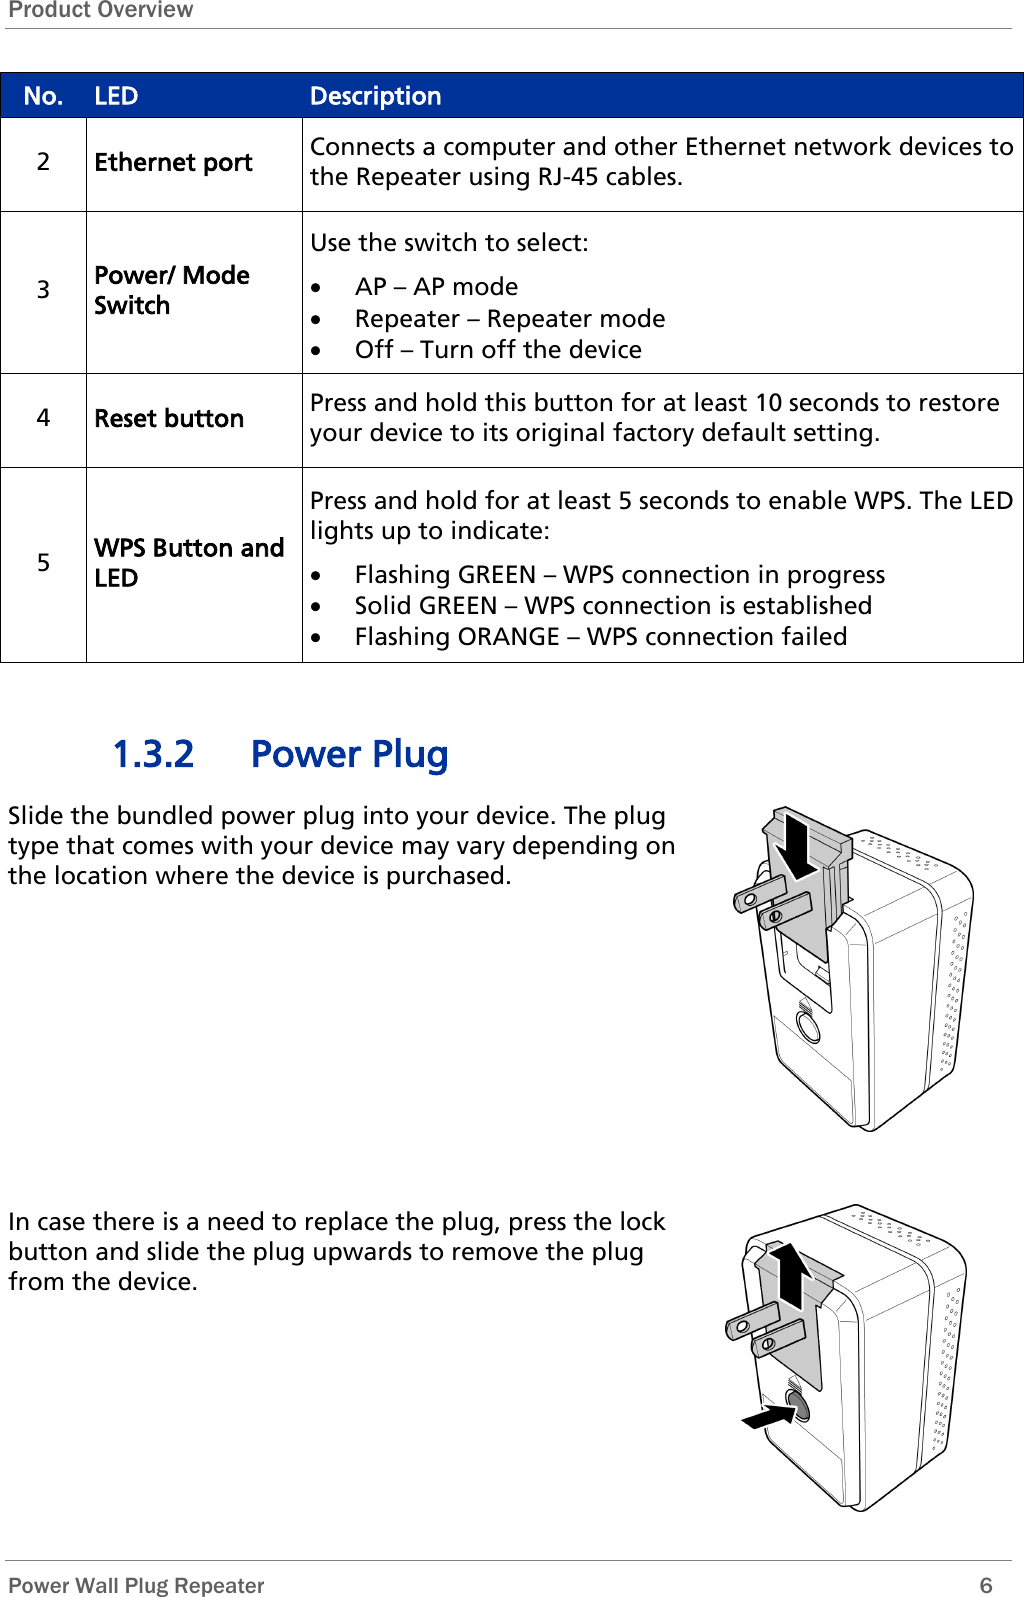 Product Overview  Power Wall Plug Repeater        6 No. LED Description 2 Ethernet port Connects a computer and other Ethernet network devices to the Repeater using RJ-45 cables. 3 Power/ Mode Switch Use the switch to select: • AP – AP mode • Repeater – Repeater mode • Off – Turn off the device 4 Reset button Press and hold this button for at least 10 seconds to restore your device to its original factory default setting. 5 WPS Button and LED Press and hold for at least 5 seconds to enable WPS. The LED lights up to indicate: • Flashing GREEN – WPS connection in progress • Solid GREEN – WPS connection is established • Flashing ORANGE – WPS connection failed  1.3.2 Power Plug Slide the bundled power plug into your device. The plug type that comes with your device may vary depending on the location where the device is purchased.         In case there is a need to replace the plug, press the lock button and slide the plug upwards to remove the plug from the device.  